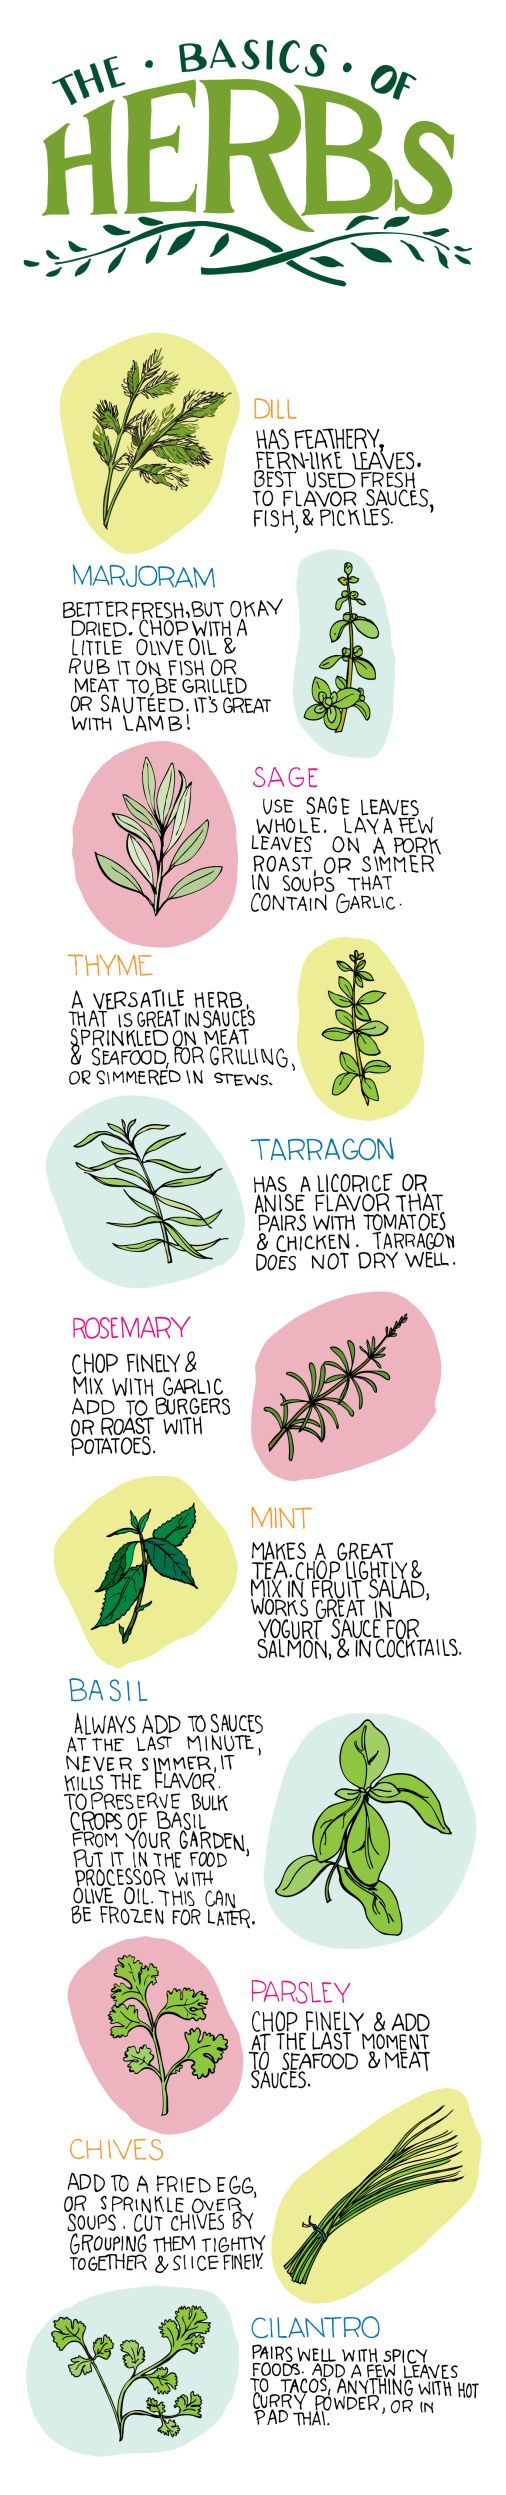 The Basics of Herbs (Infographic)